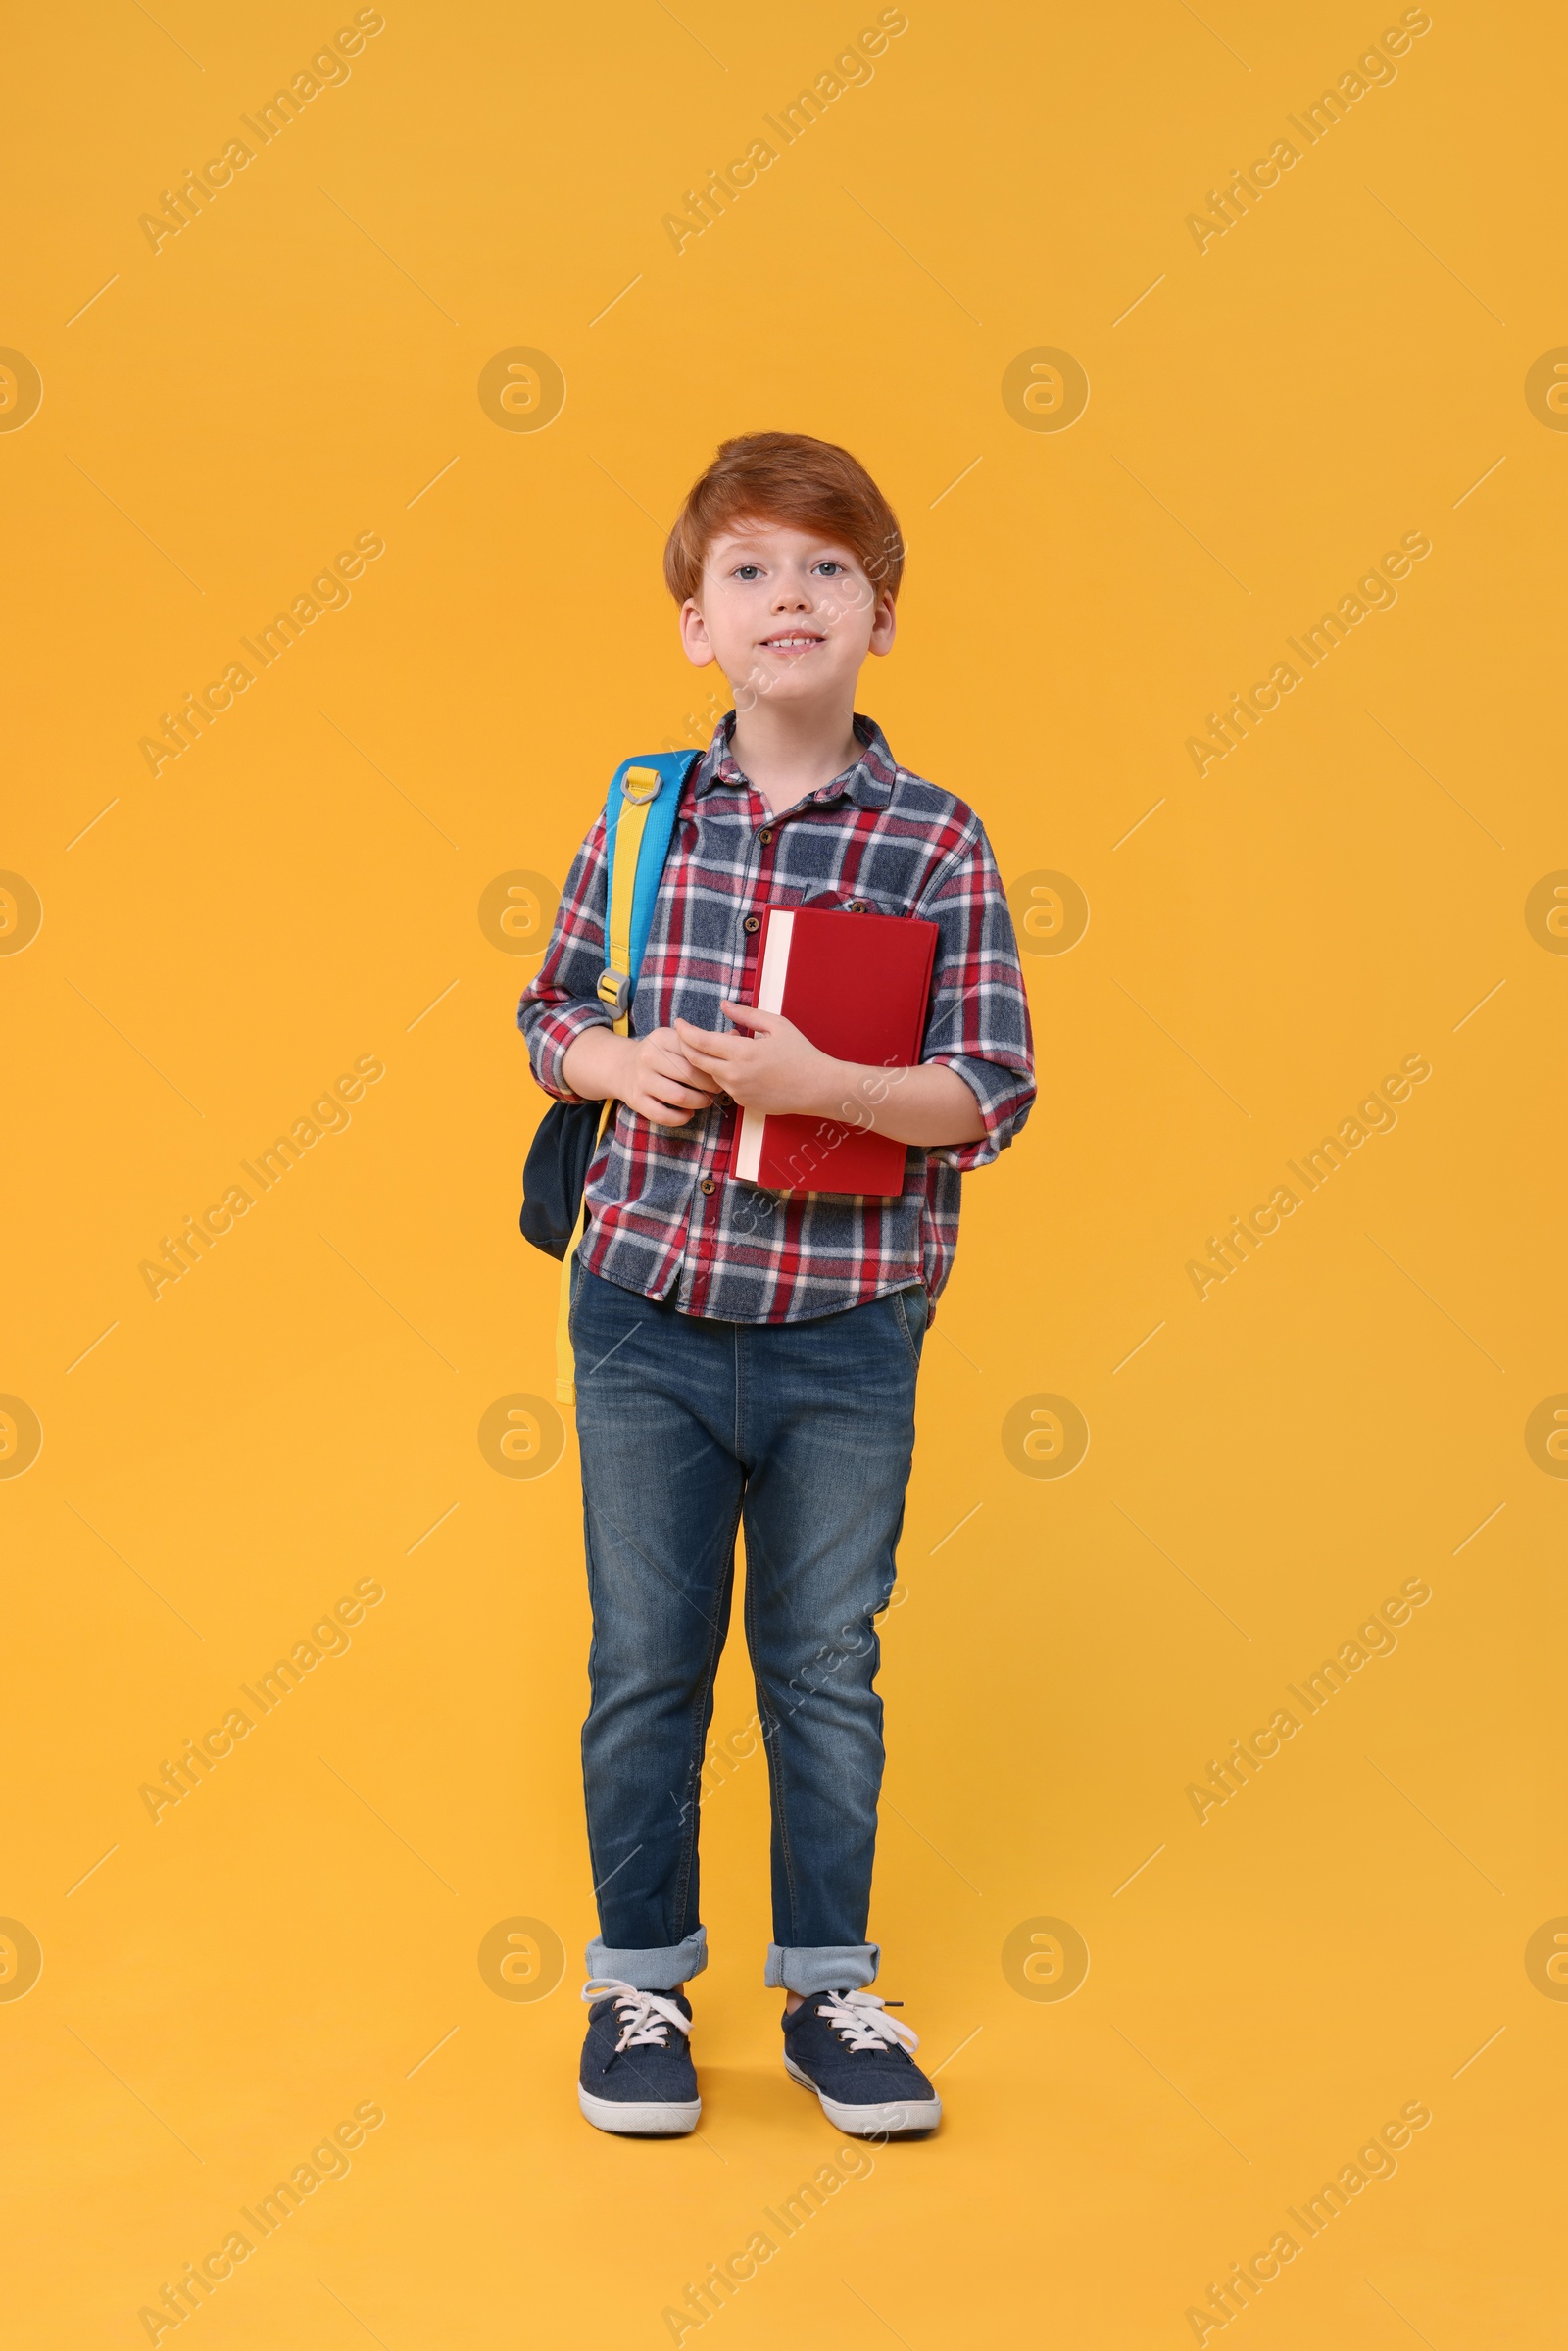 Photo of Smiling schoolboy with backpack and book on orange background